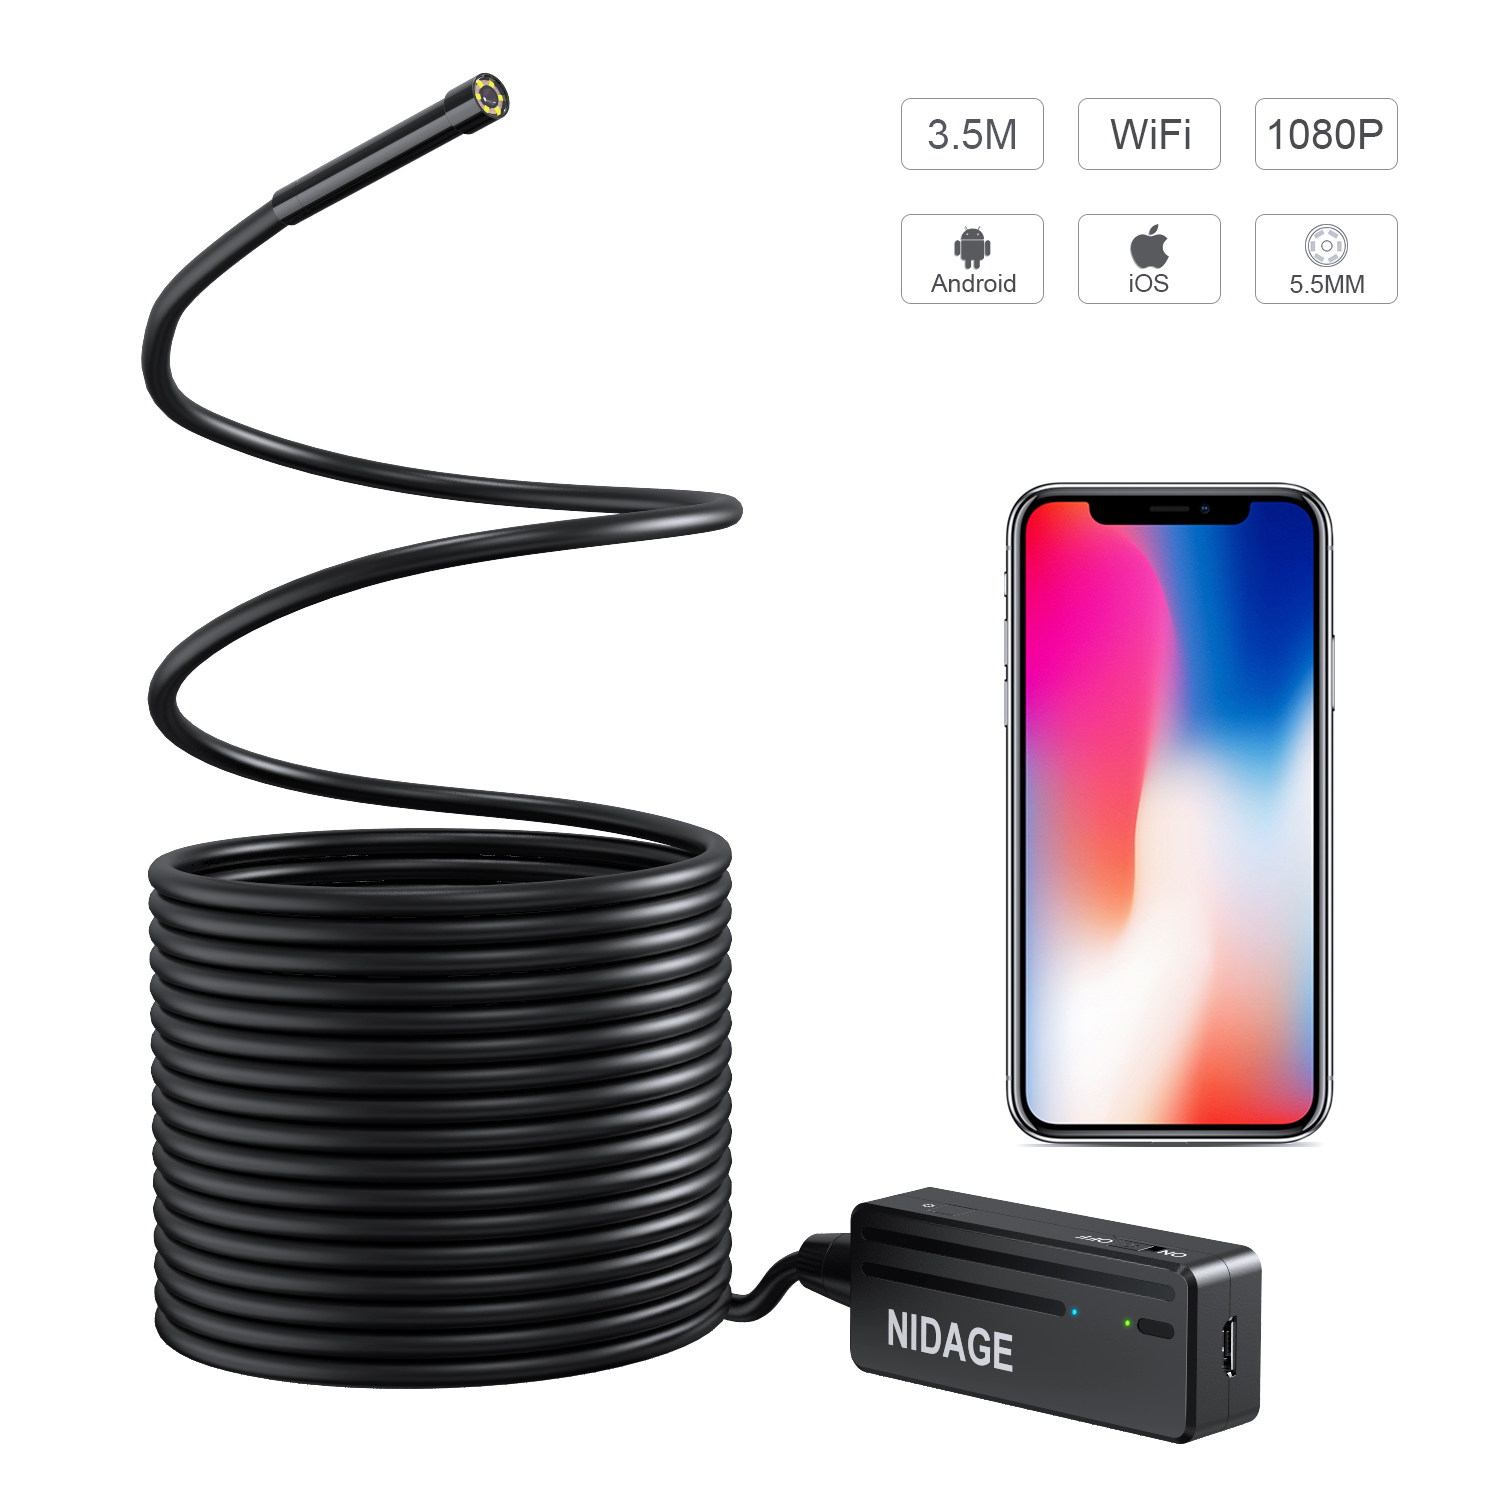 WiFi Borescope 1080P 5.5mm Inspection Camera, NIDAGE 11.5FT Semi Rigid WiFi Endoscope 2.0 MP HD Snake Camera for iPhone Android Smartphone, Tablet , iPad